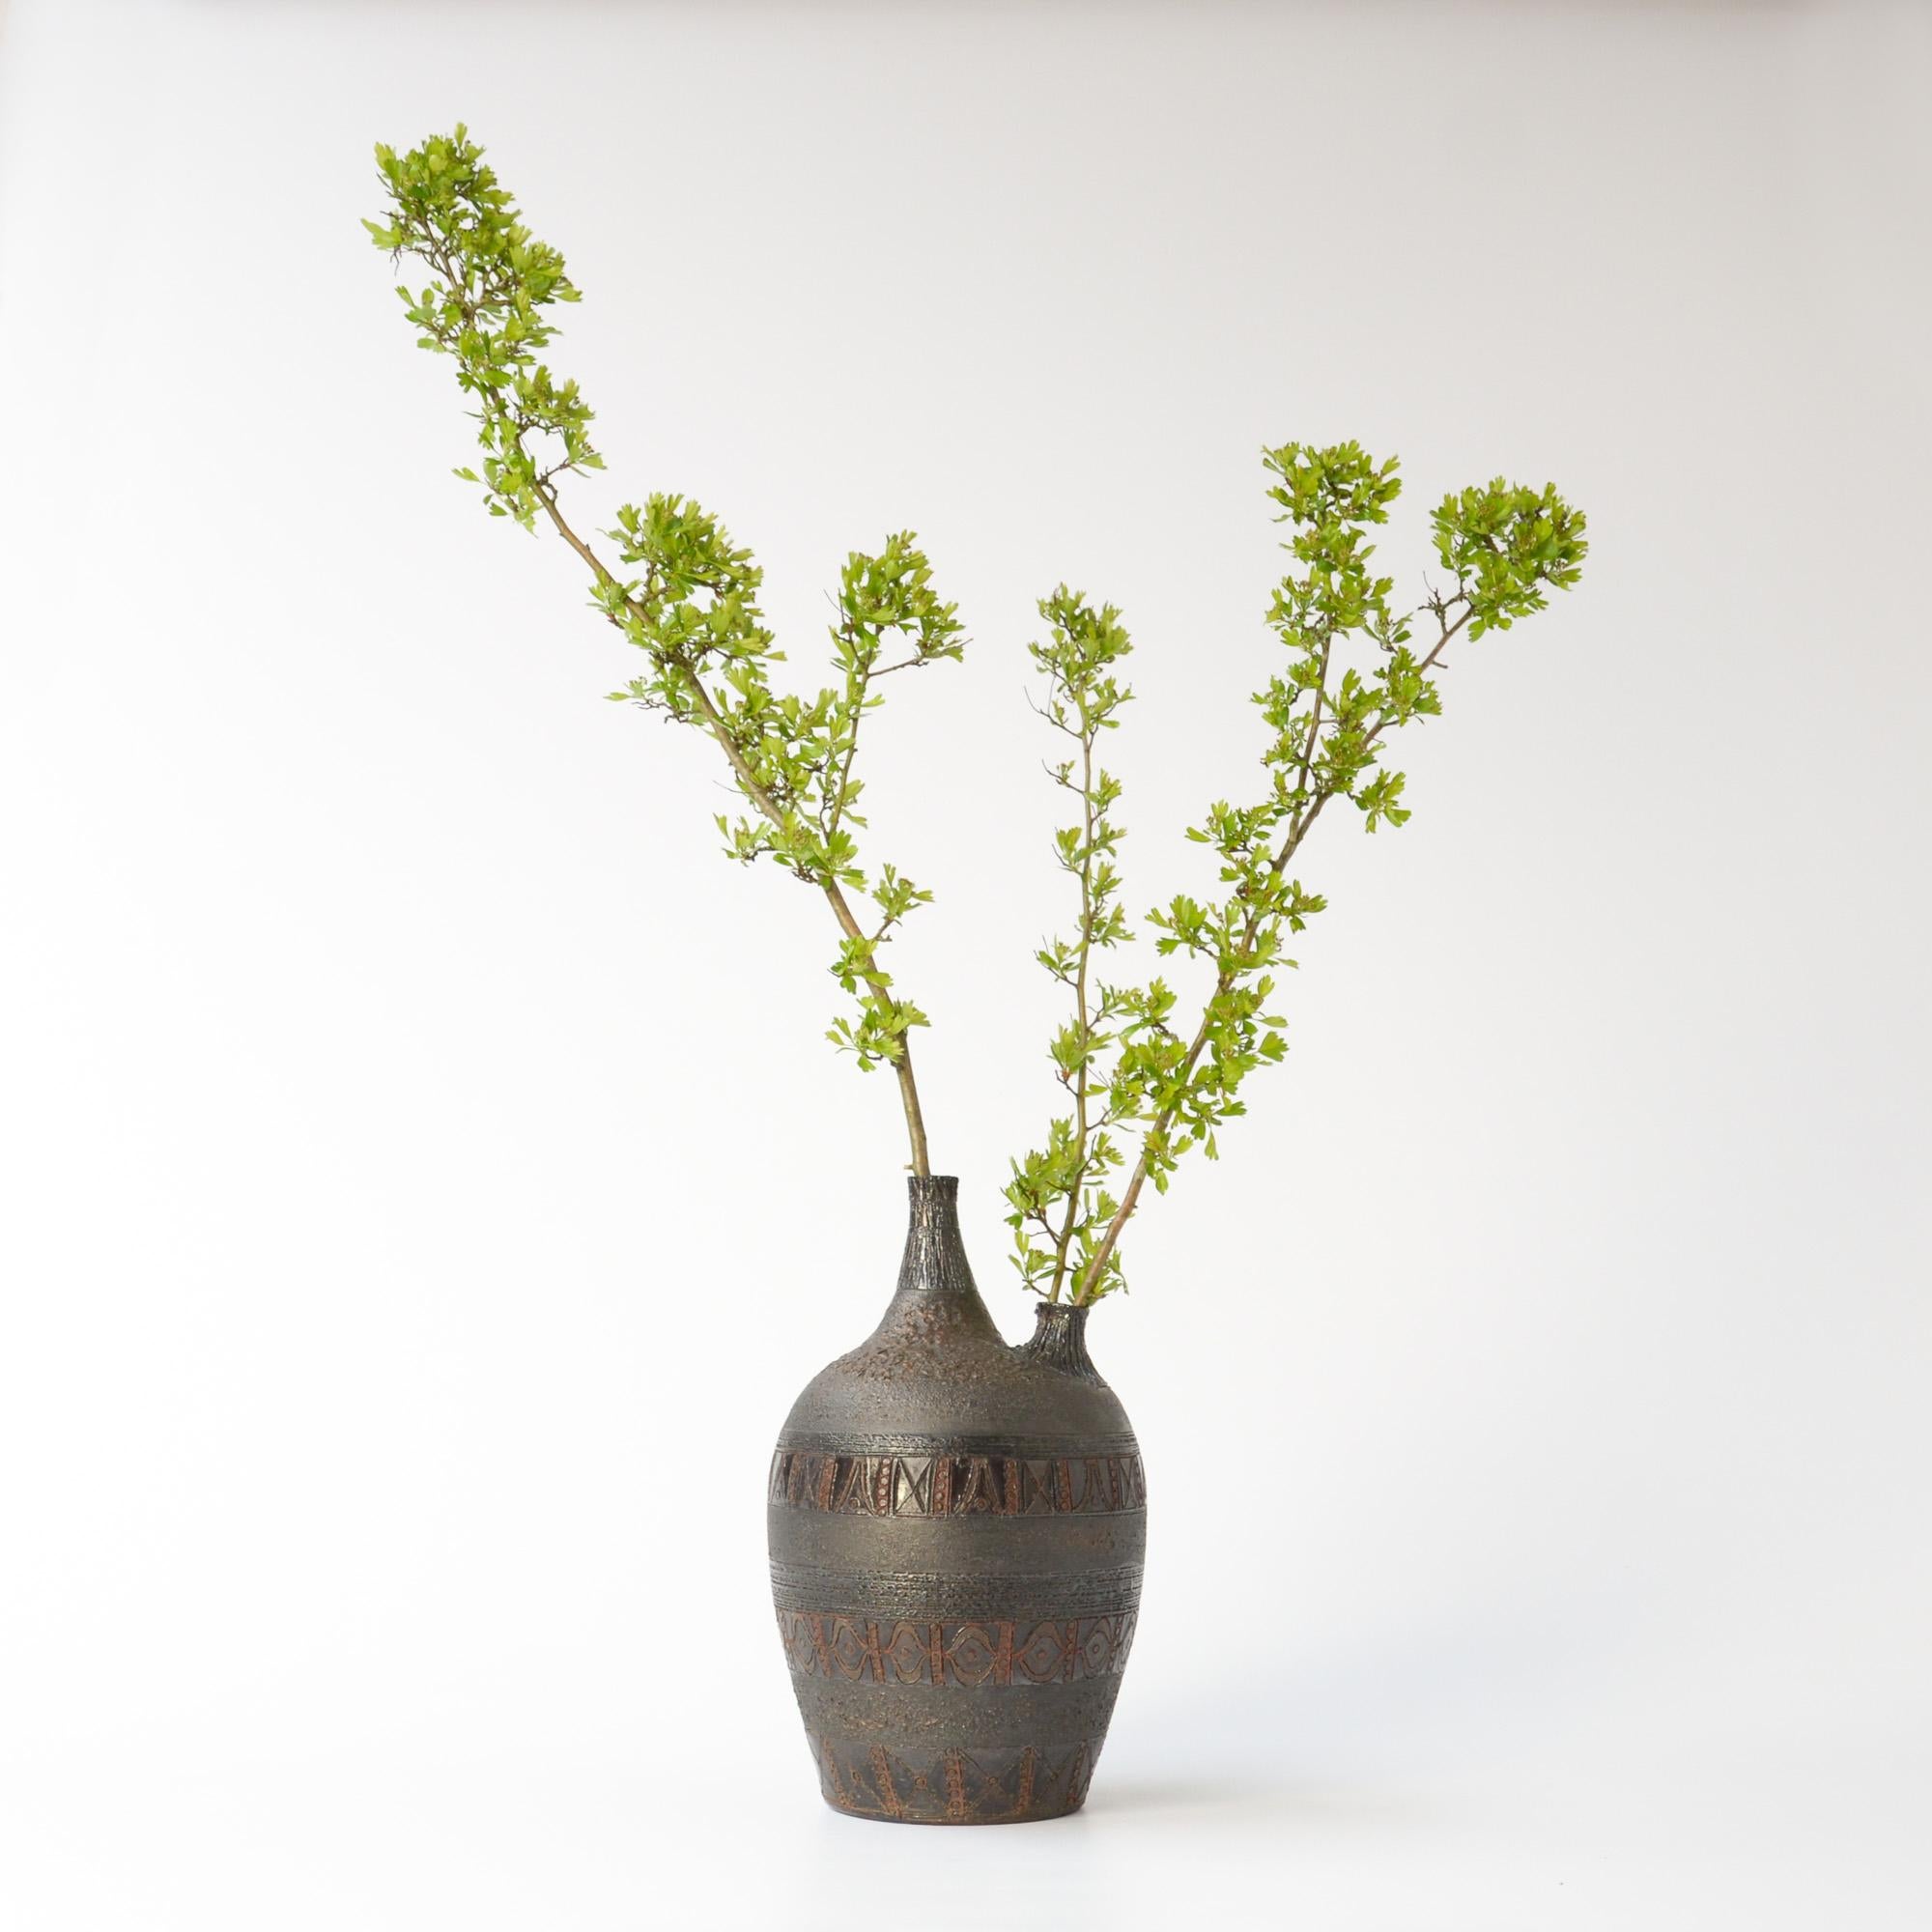 This impressive vase is created by Rogier Vandeweghe for Amphora. It can be dated circa 1965. The brutalist glaze and the shape are amazing. This pure vase is a unique piece in perfect condition.